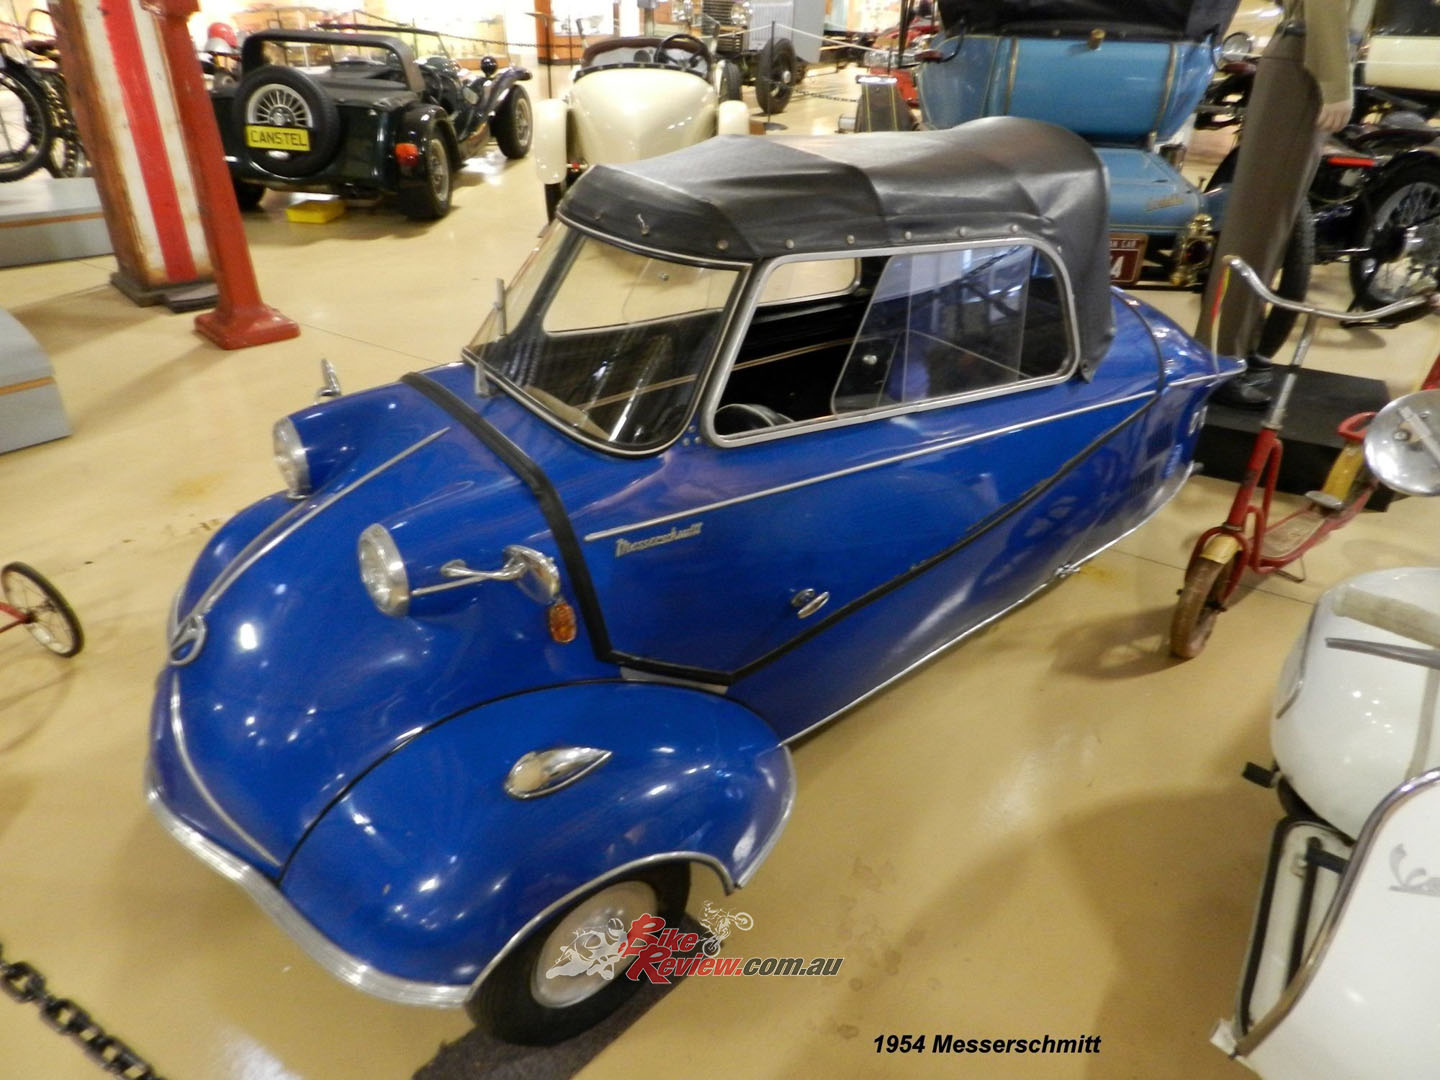 What kind of automotive museum would it be without a Messerschmitt? This is one of the attractions at the NRMA’s Australian Motorlife Museum. (Photo NRMA)